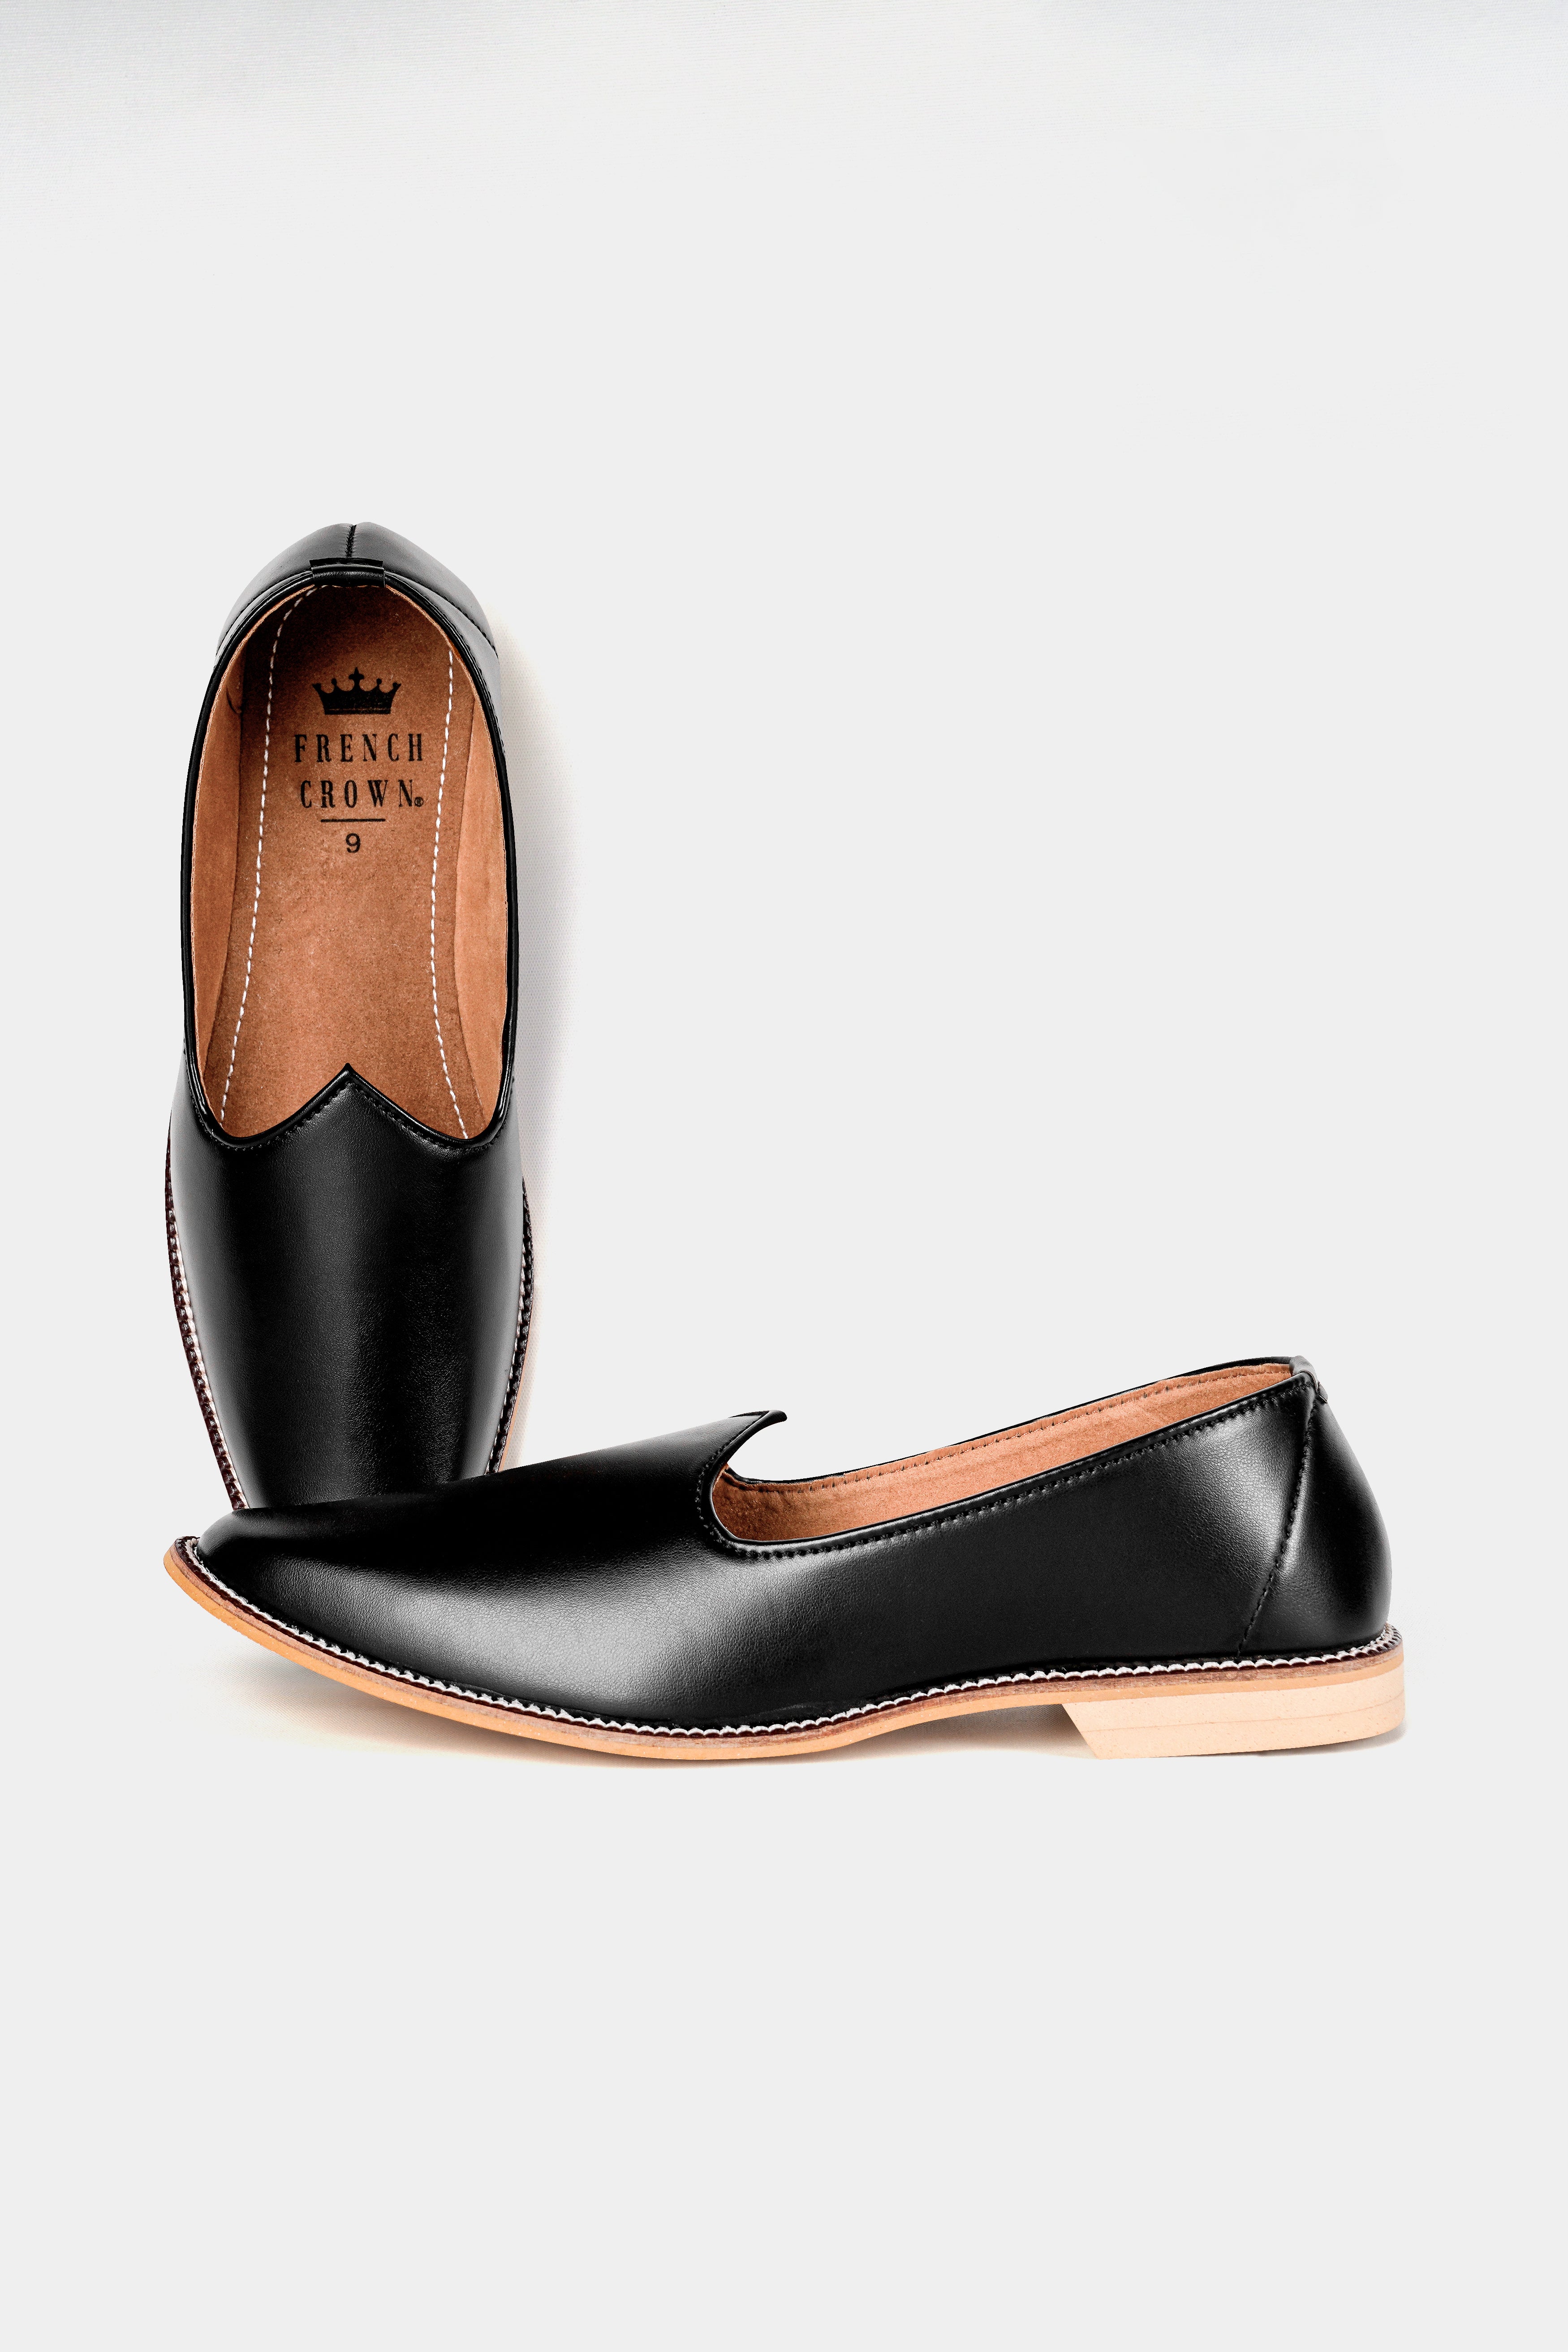 Footwear for Men | Designer Menswear Collection at Aza Fashions